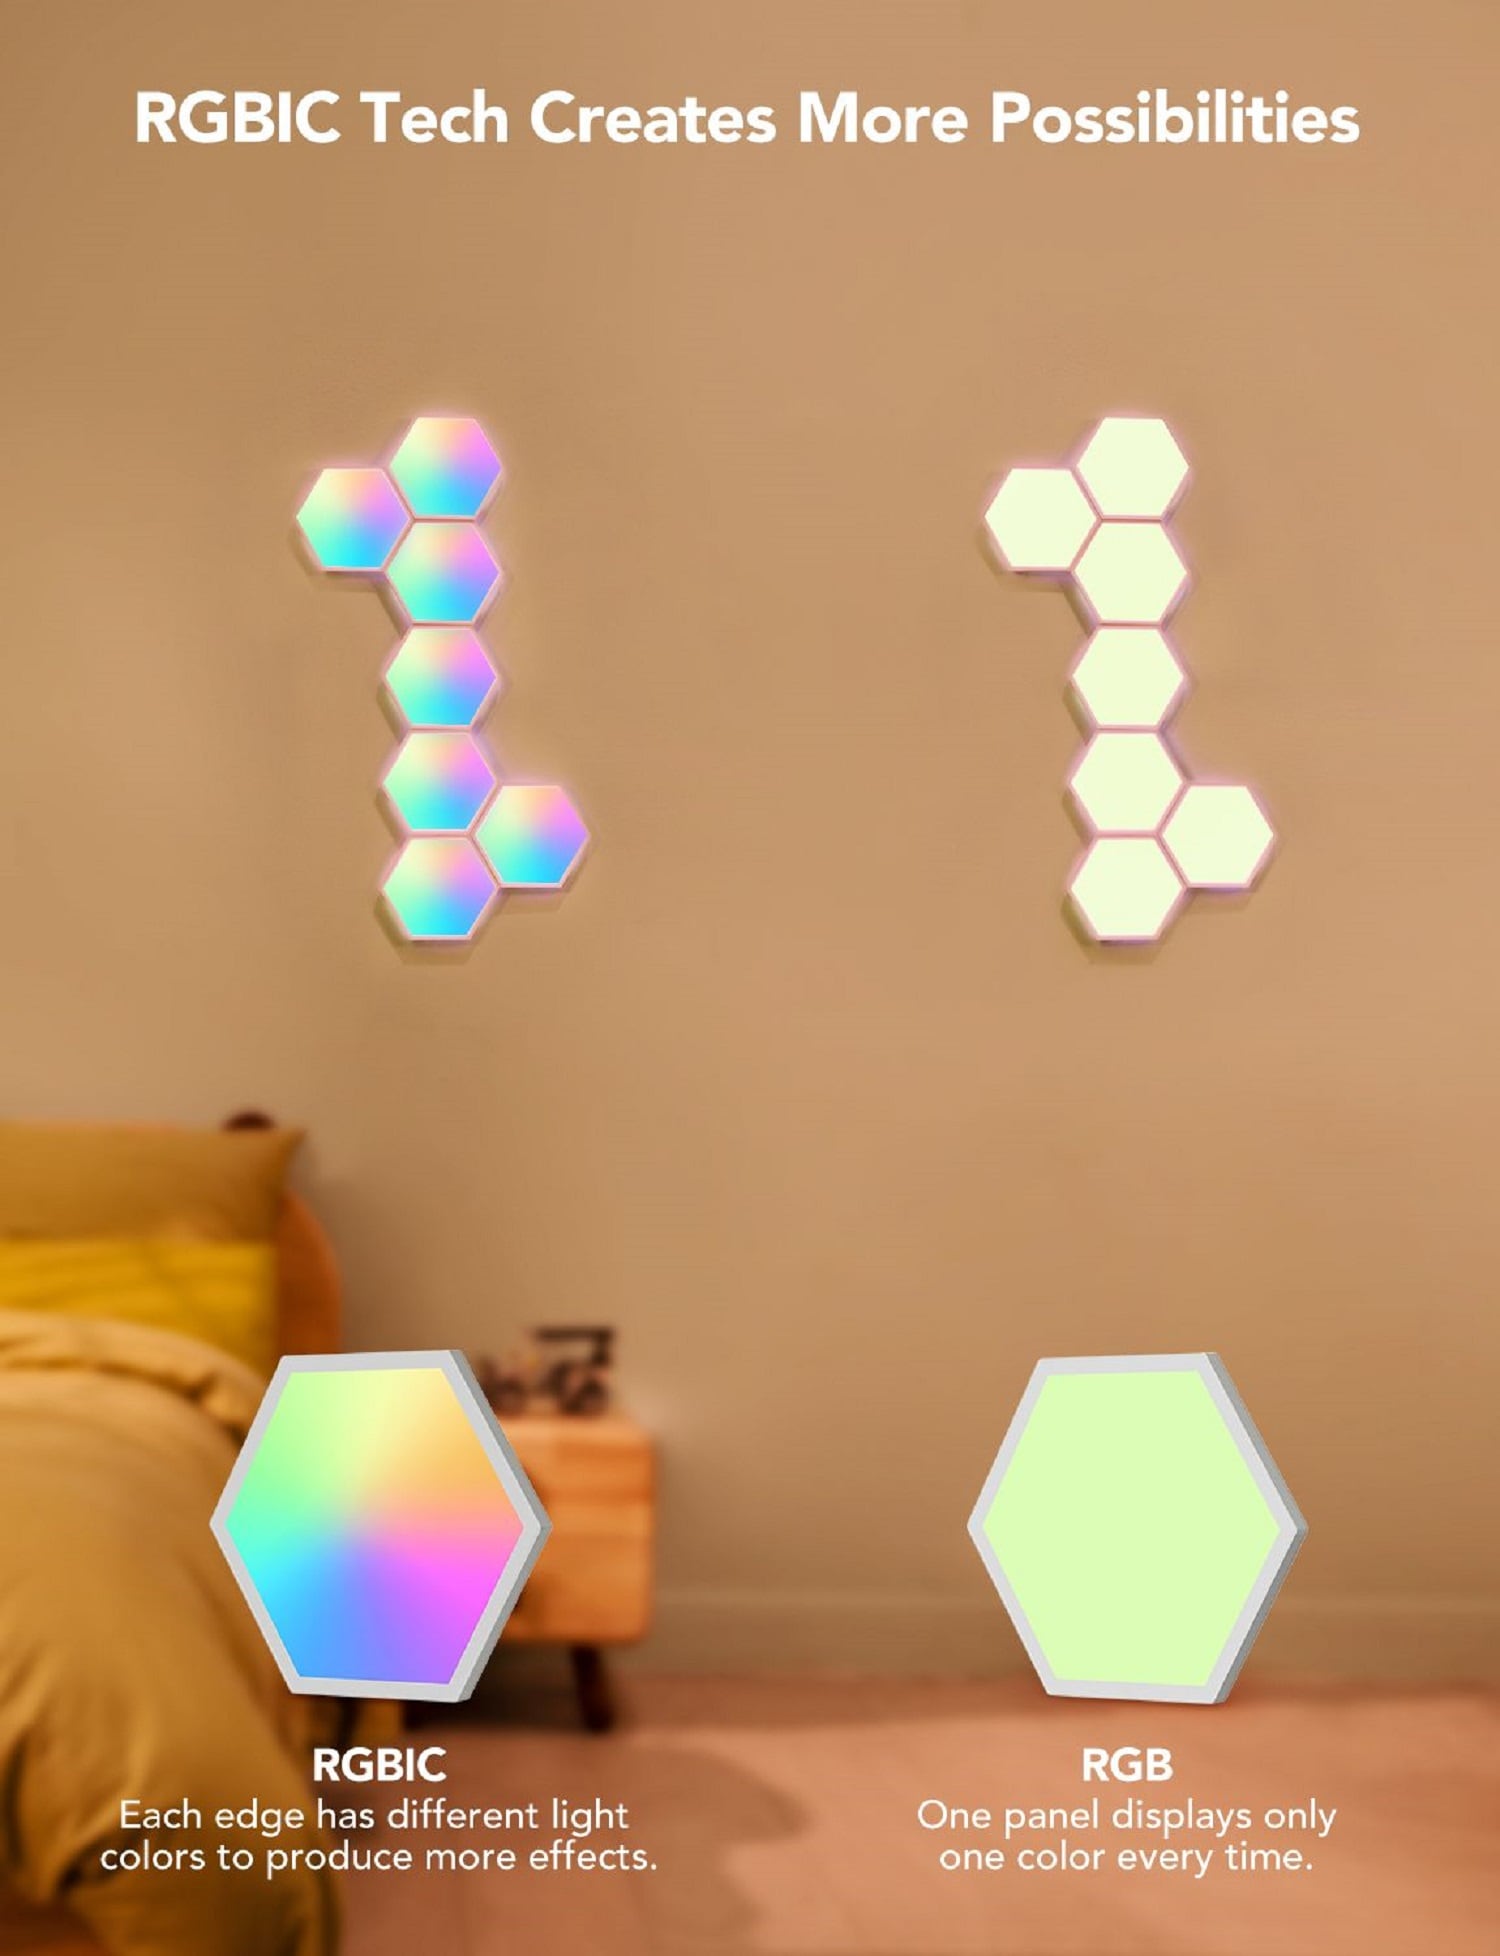 Govee 0.71-in Accent Lighting Smart Effect Lights LED Light in the Novelty  Lights department at